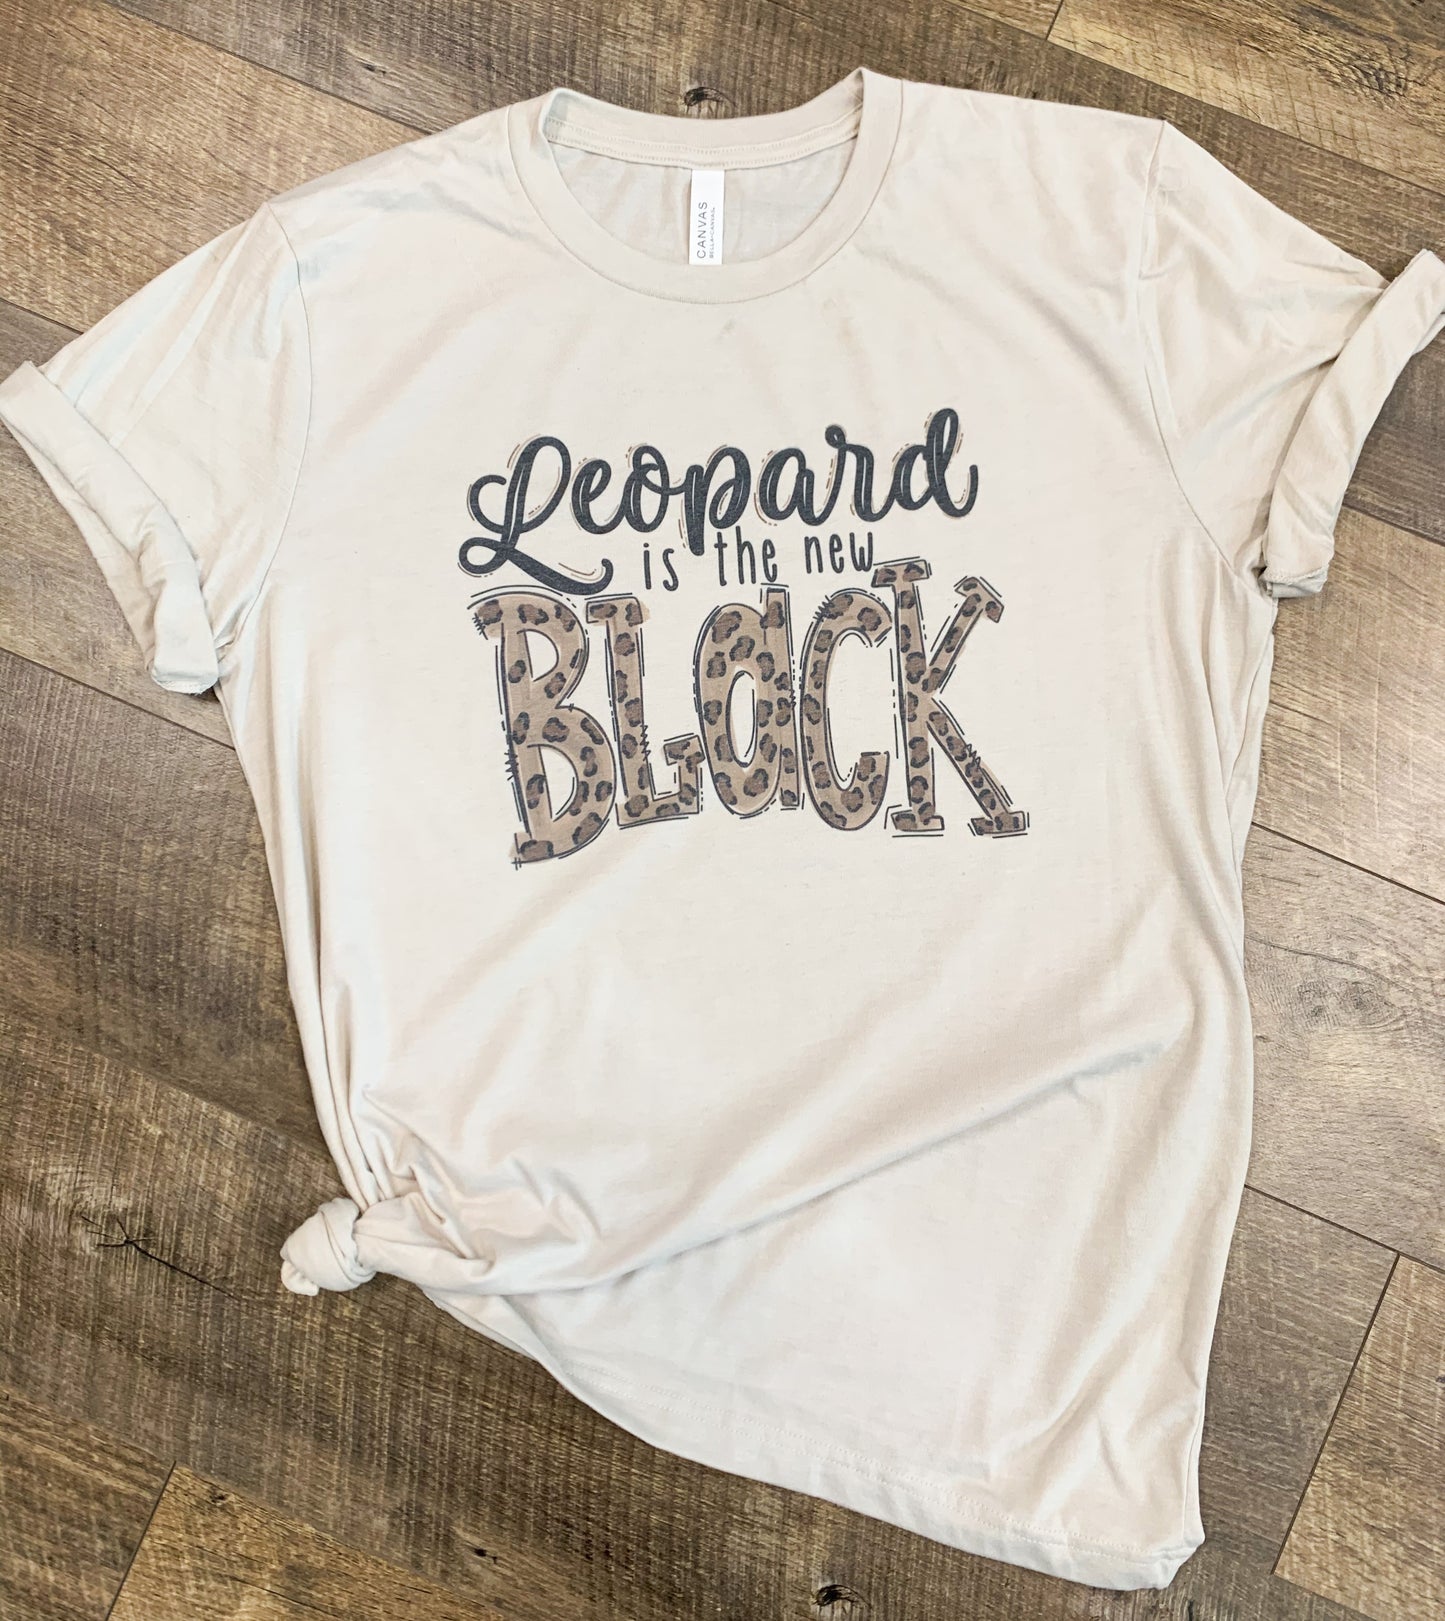 Leopard is the New Black - Vintage Style T-Shirt